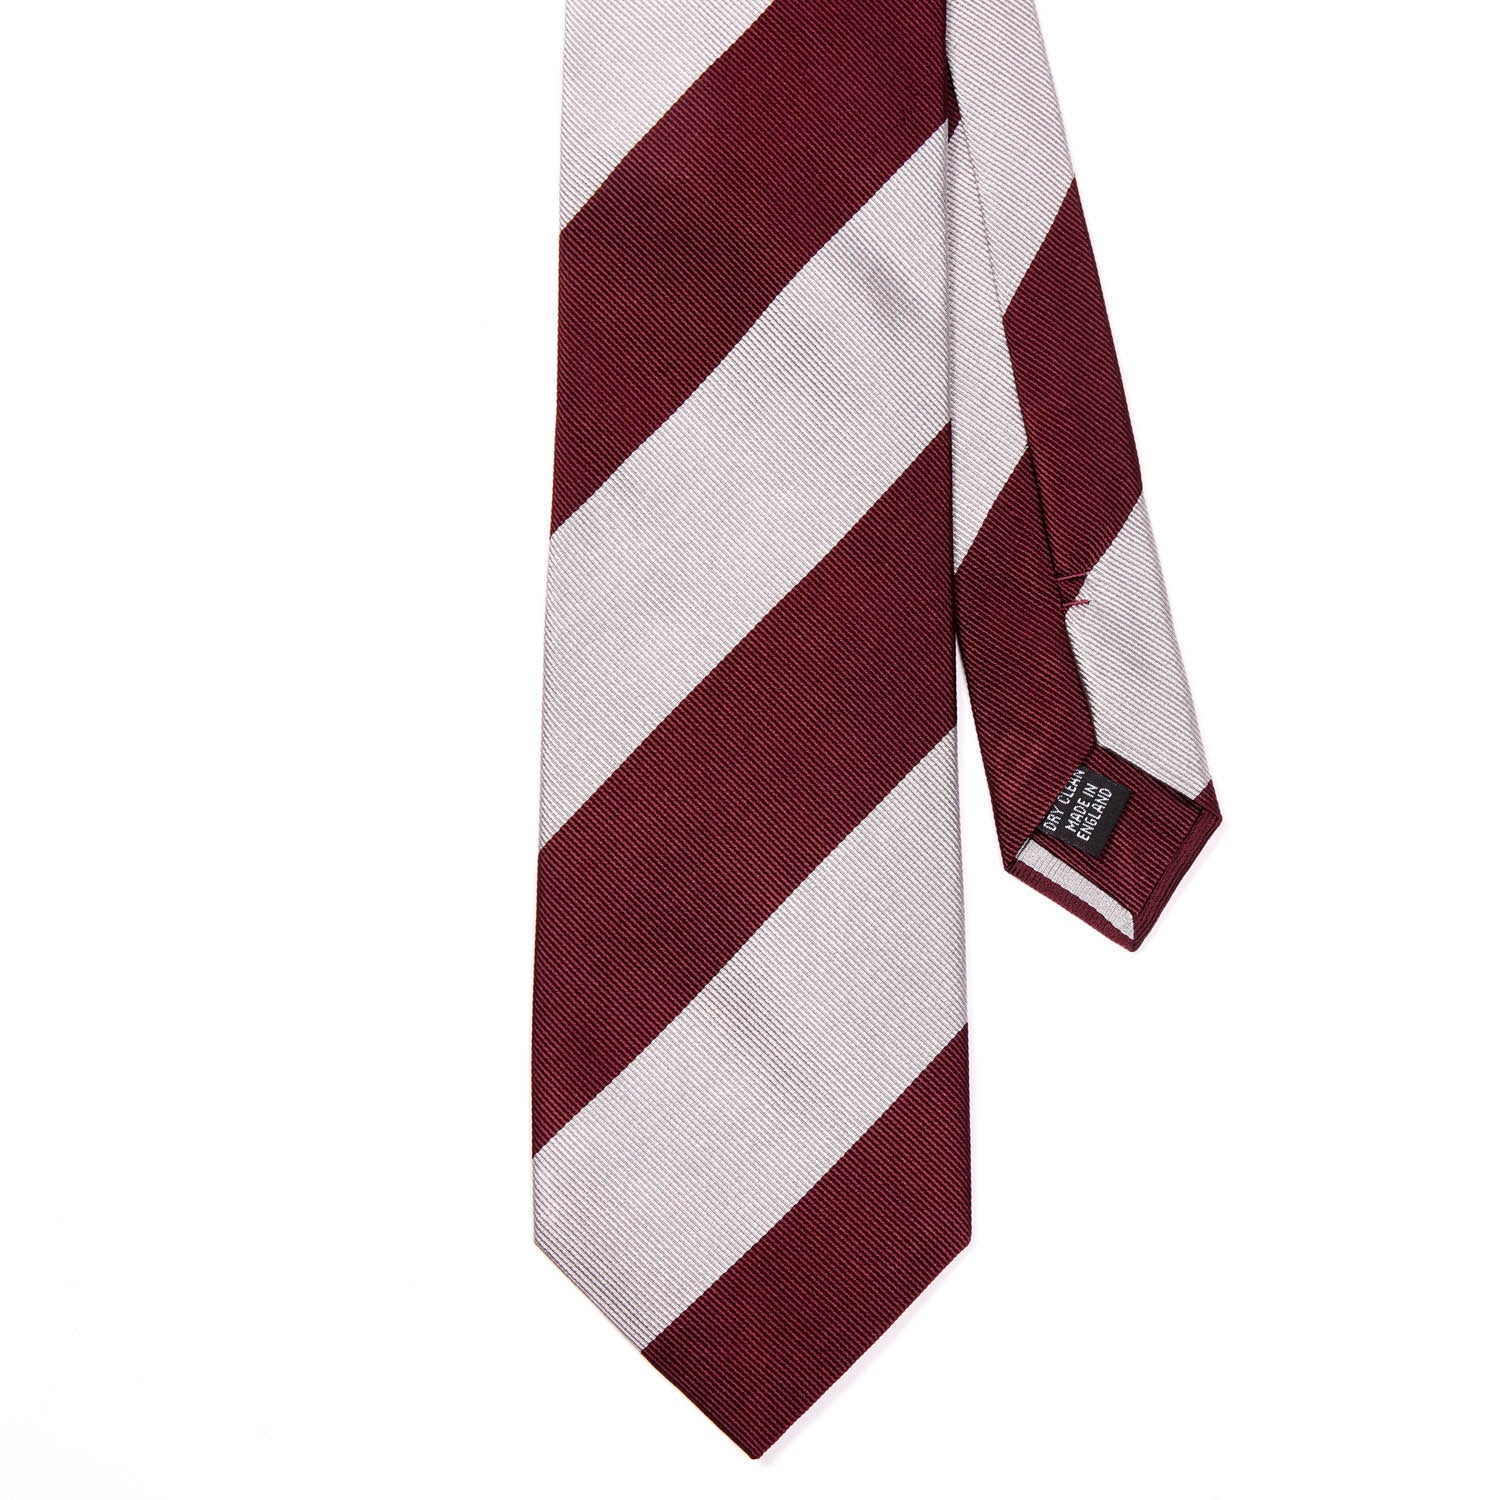 A Sovereign Grade Oxblood Wide Rep Tie, 150cm by KirbyAllison.com, in burgundy and white stripes on a white background, handmade in the United Kingdom.